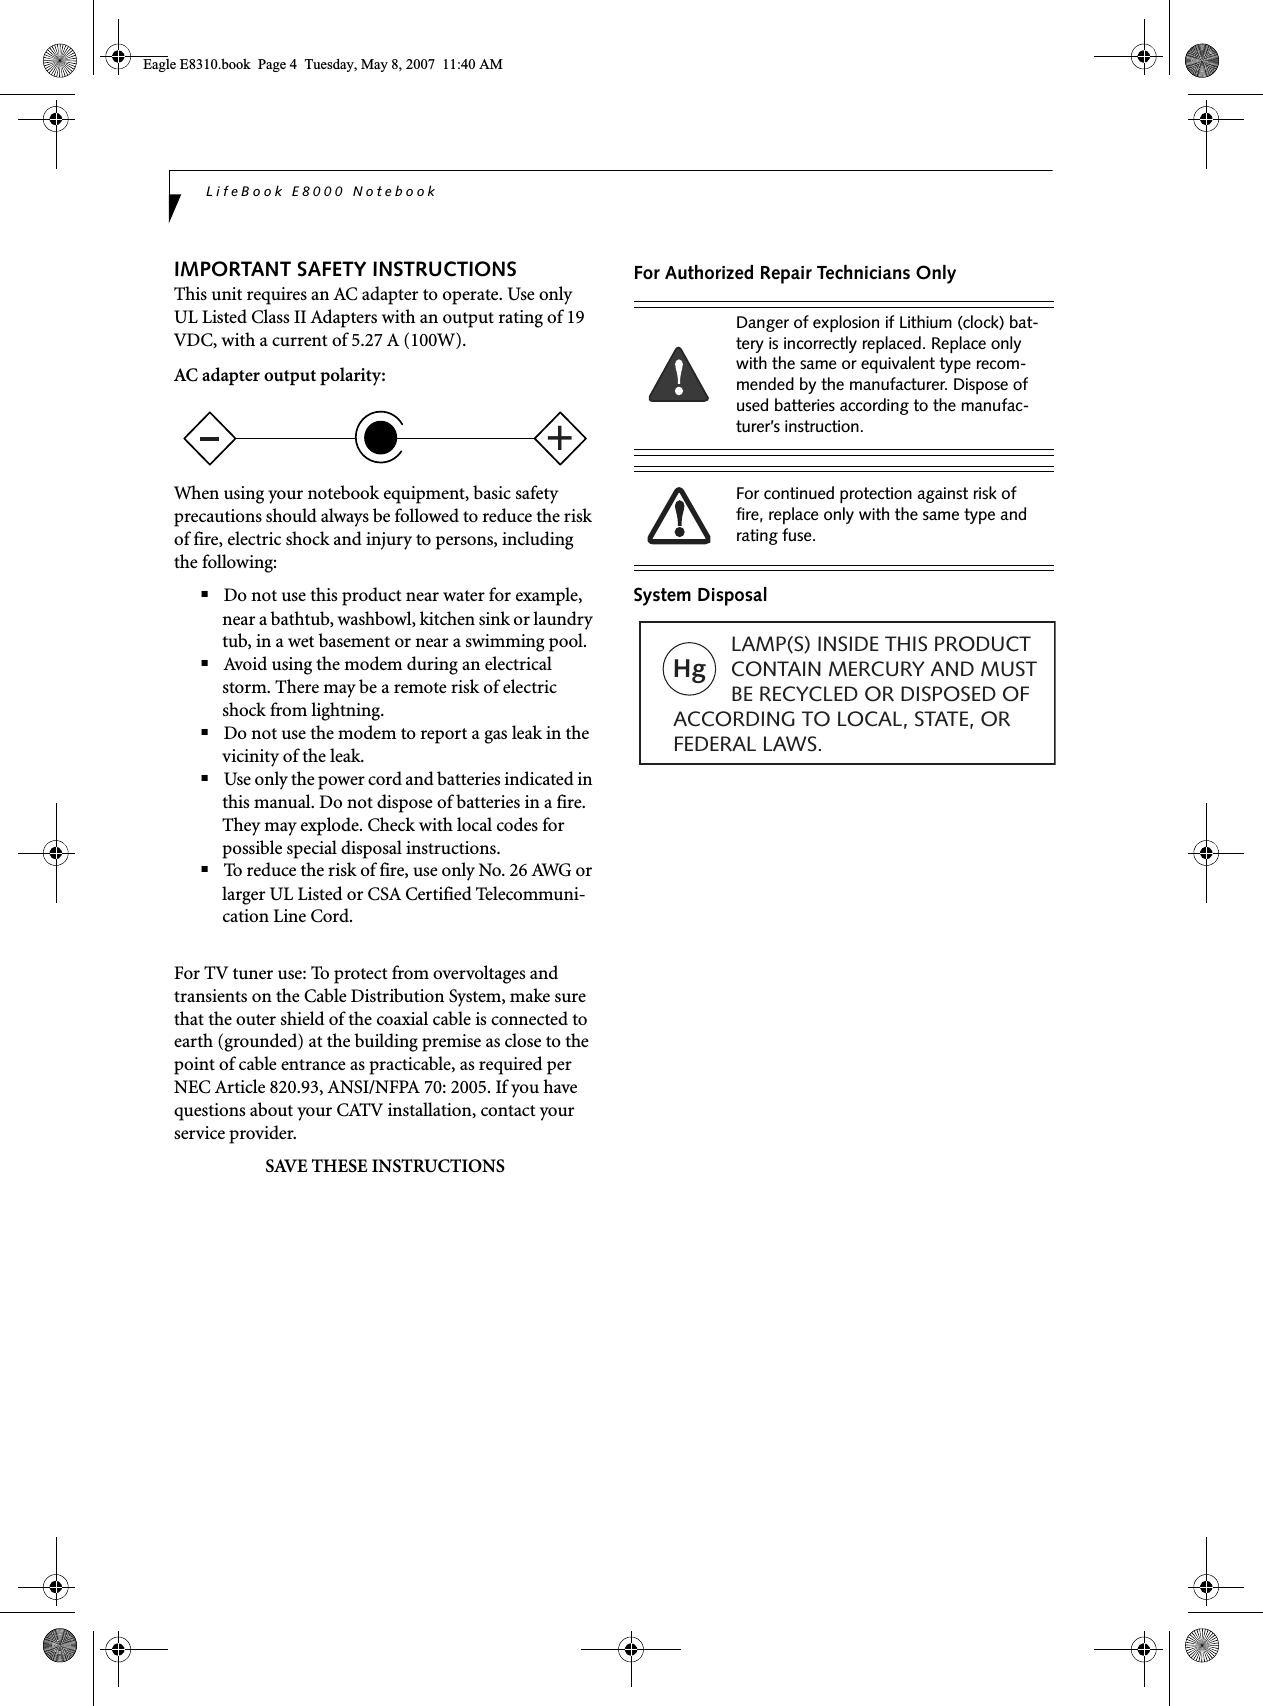 LifeBook E8000 NotebookIMPORTANT SAFETY INSTRUCTIONS This unit requires an AC adapter to operate. Use only UL Listed Class II Adapters with an output rating of 19 VDC, with a current of 5.27 A (100W).AC adapter output polarity:When using your notebook equipment, basic safety precautions should always be followed to reduce the risk of fire, electric shock and injury to persons, including the following:■Do not use this product near water for example, near a bathtub, washbowl, kitchen sink or laundry tub, in a wet basement or near a swimming pool.■Avoid using the modem during an electrical storm. There may be a remote risk of electric shock from lightning.■Do not use the modem to report a gas leak in the vicinity of the leak.■Use only the power cord and batteries indicated in this manual. Do not dispose of batteries in a fire. They may explode. Check with local codes for possible special disposal instructions.■To reduce the risk of fire, use only No. 26 AWG or larger UL Listed or CSA Certified Telecommuni-cation Line Cord.For TV tuner use: To protect from overvoltages and transients on the Cable Distribution System, make sure that the outer shield of the coaxial cable is connected to earth (grounded) at the building premise as close to the point of cable entrance as practicable, as required per NEC Article 820.93, ANSI/NFPA 70: 2005. If you have questions about your CATV installation, contact your service provider.SAVE THESE INSTRUCTIONSFor Authorized Repair Technicians OnlySystem Disposal+Danger of explosion if Lithium (clock) bat-tery is incorrectly replaced. Replace only with the same or equivalent type recom-mended by the manufacturer. Dispose of used batteries according to the manufac-turer’s instruction.For continued protection against risk of fire, replace only with the same type and rating fuse.Hg          LAMP(S) INSIDE THIS PRODUCT            CONTAIN MERCURY AND MUST          BE RECYCLED OR DISPOSED OF ACCORDING TO LOCAL, STATE, ORFEDERAL LAWS.Eagle E8310.book  Page 4  Tuesday, May 8, 2007  11:40 AM